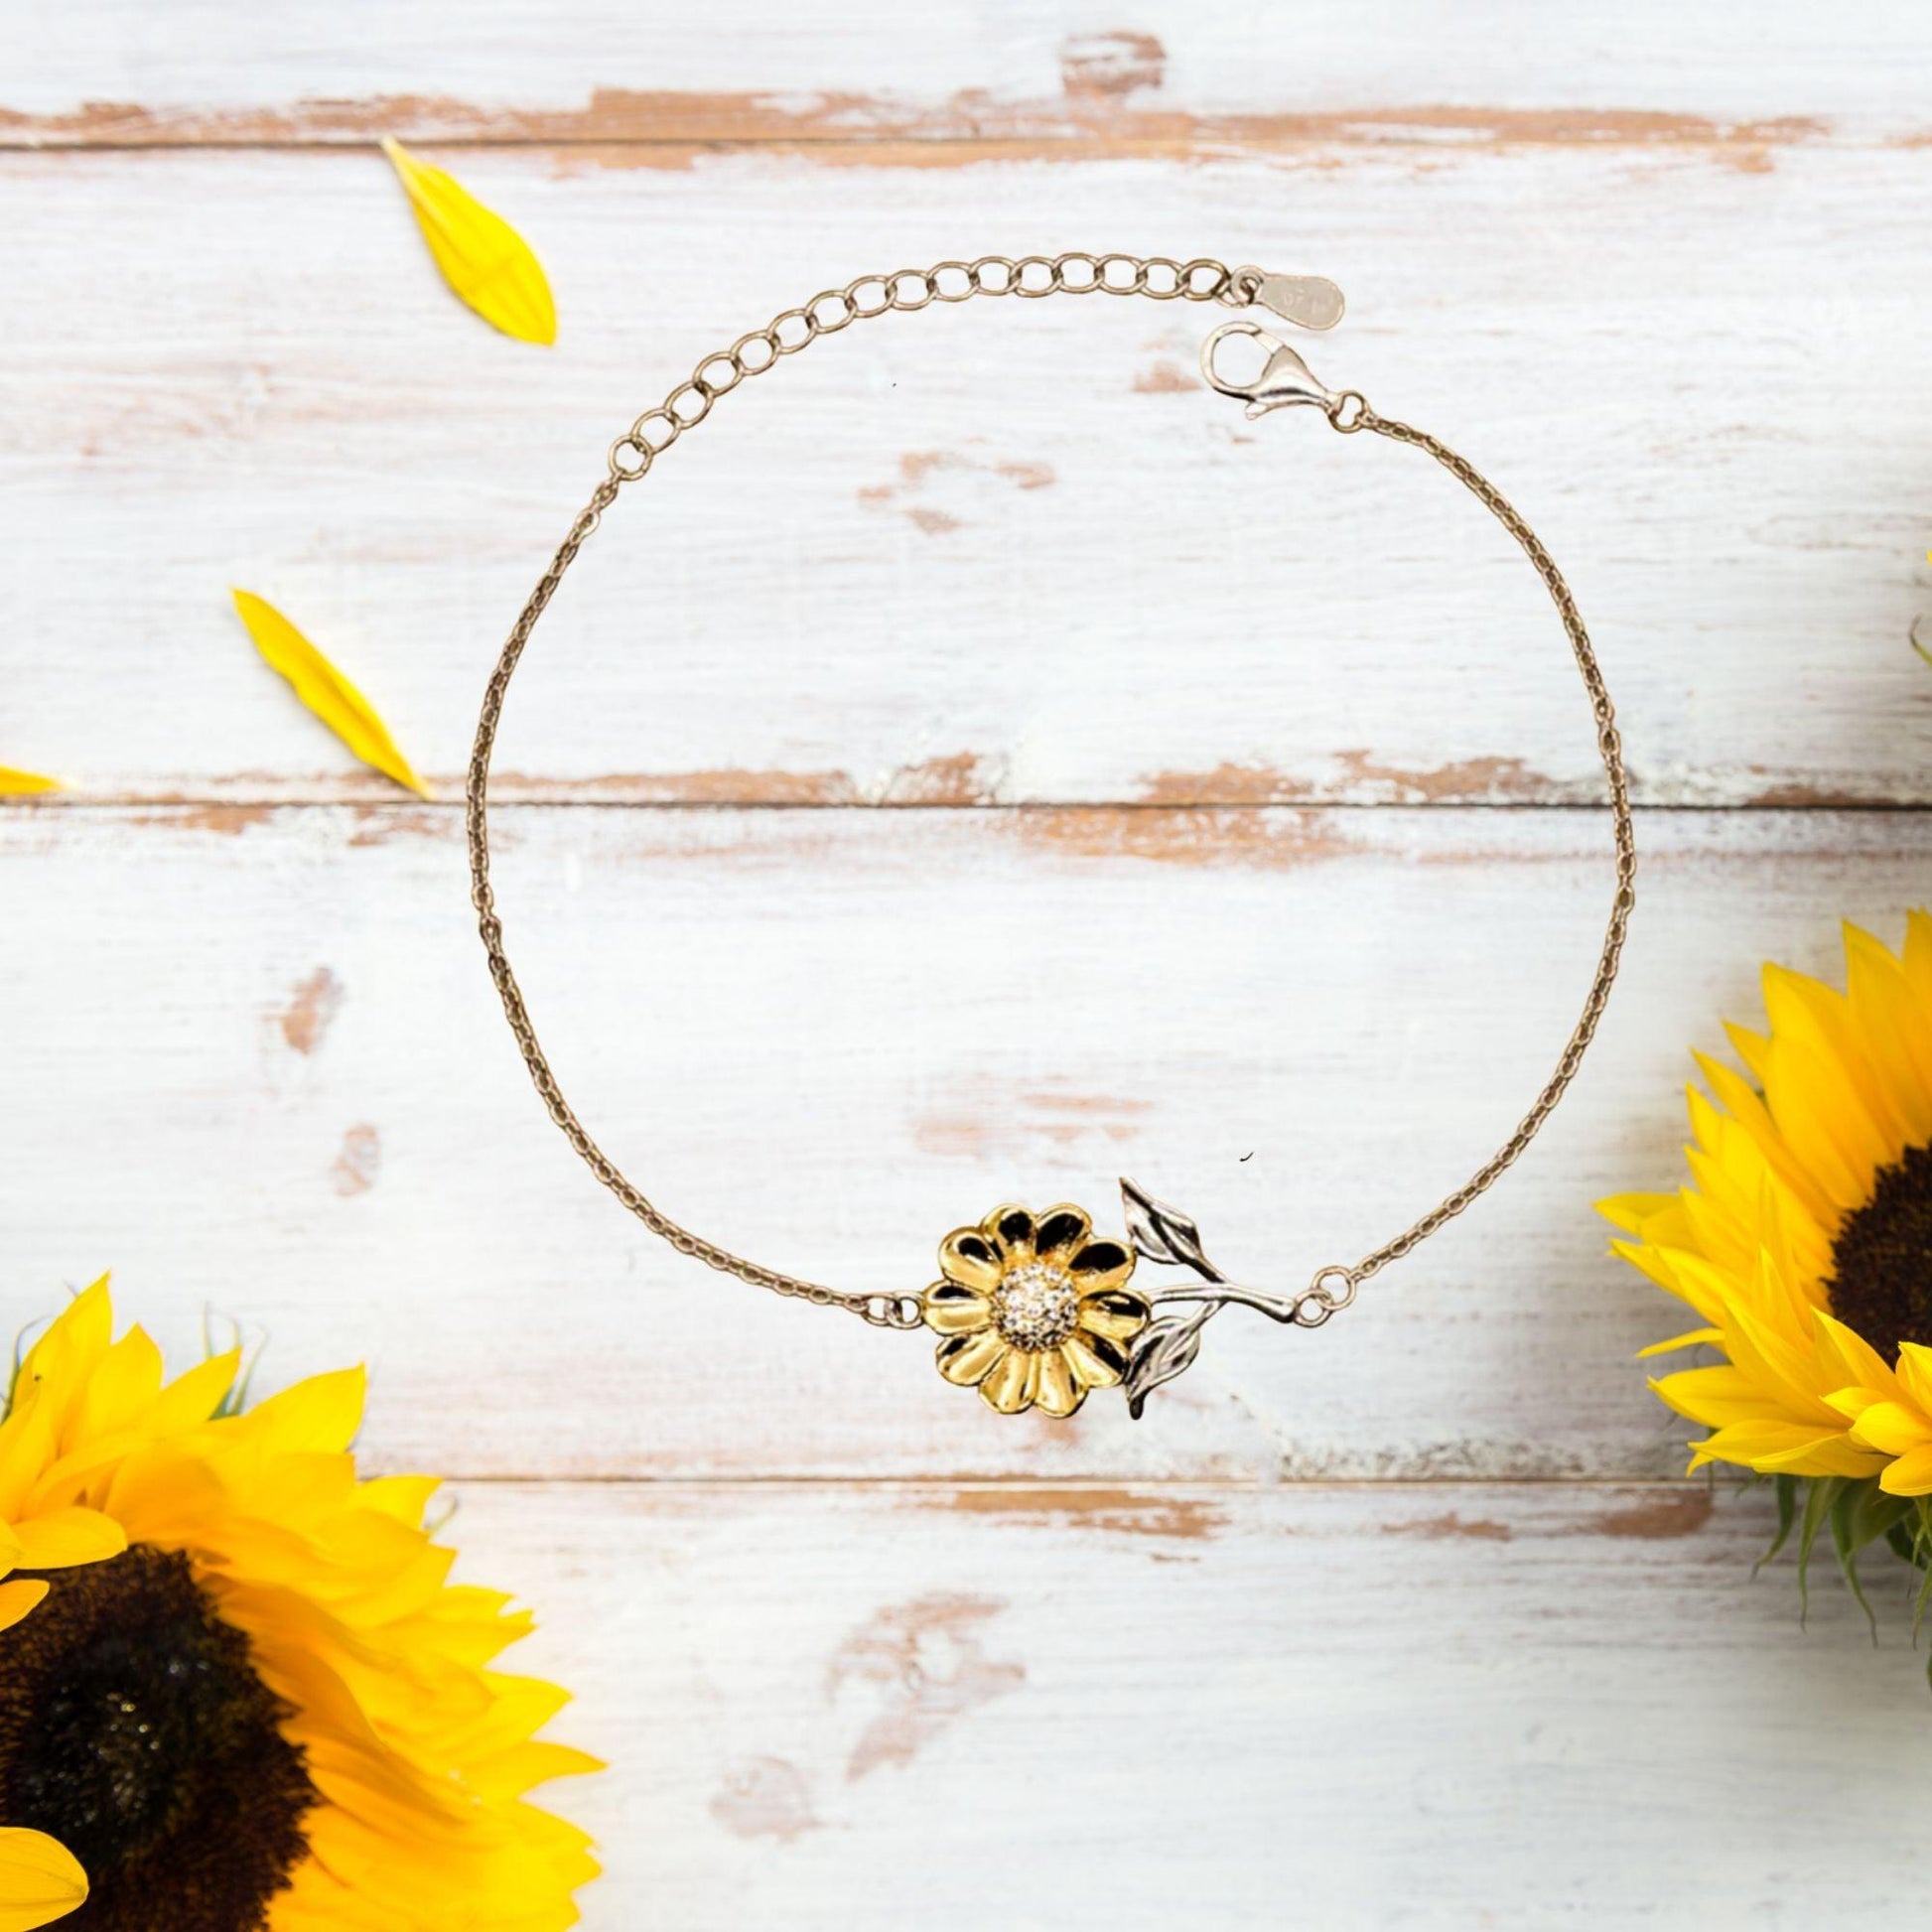 Remarkable Drafter Gifts, Your dedication and hard work, Inspirational Birthday Christmas Unique Sunflower Bracelet For Drafter, Coworkers, Men, Women, Friends - Mallard Moon Gift Shop